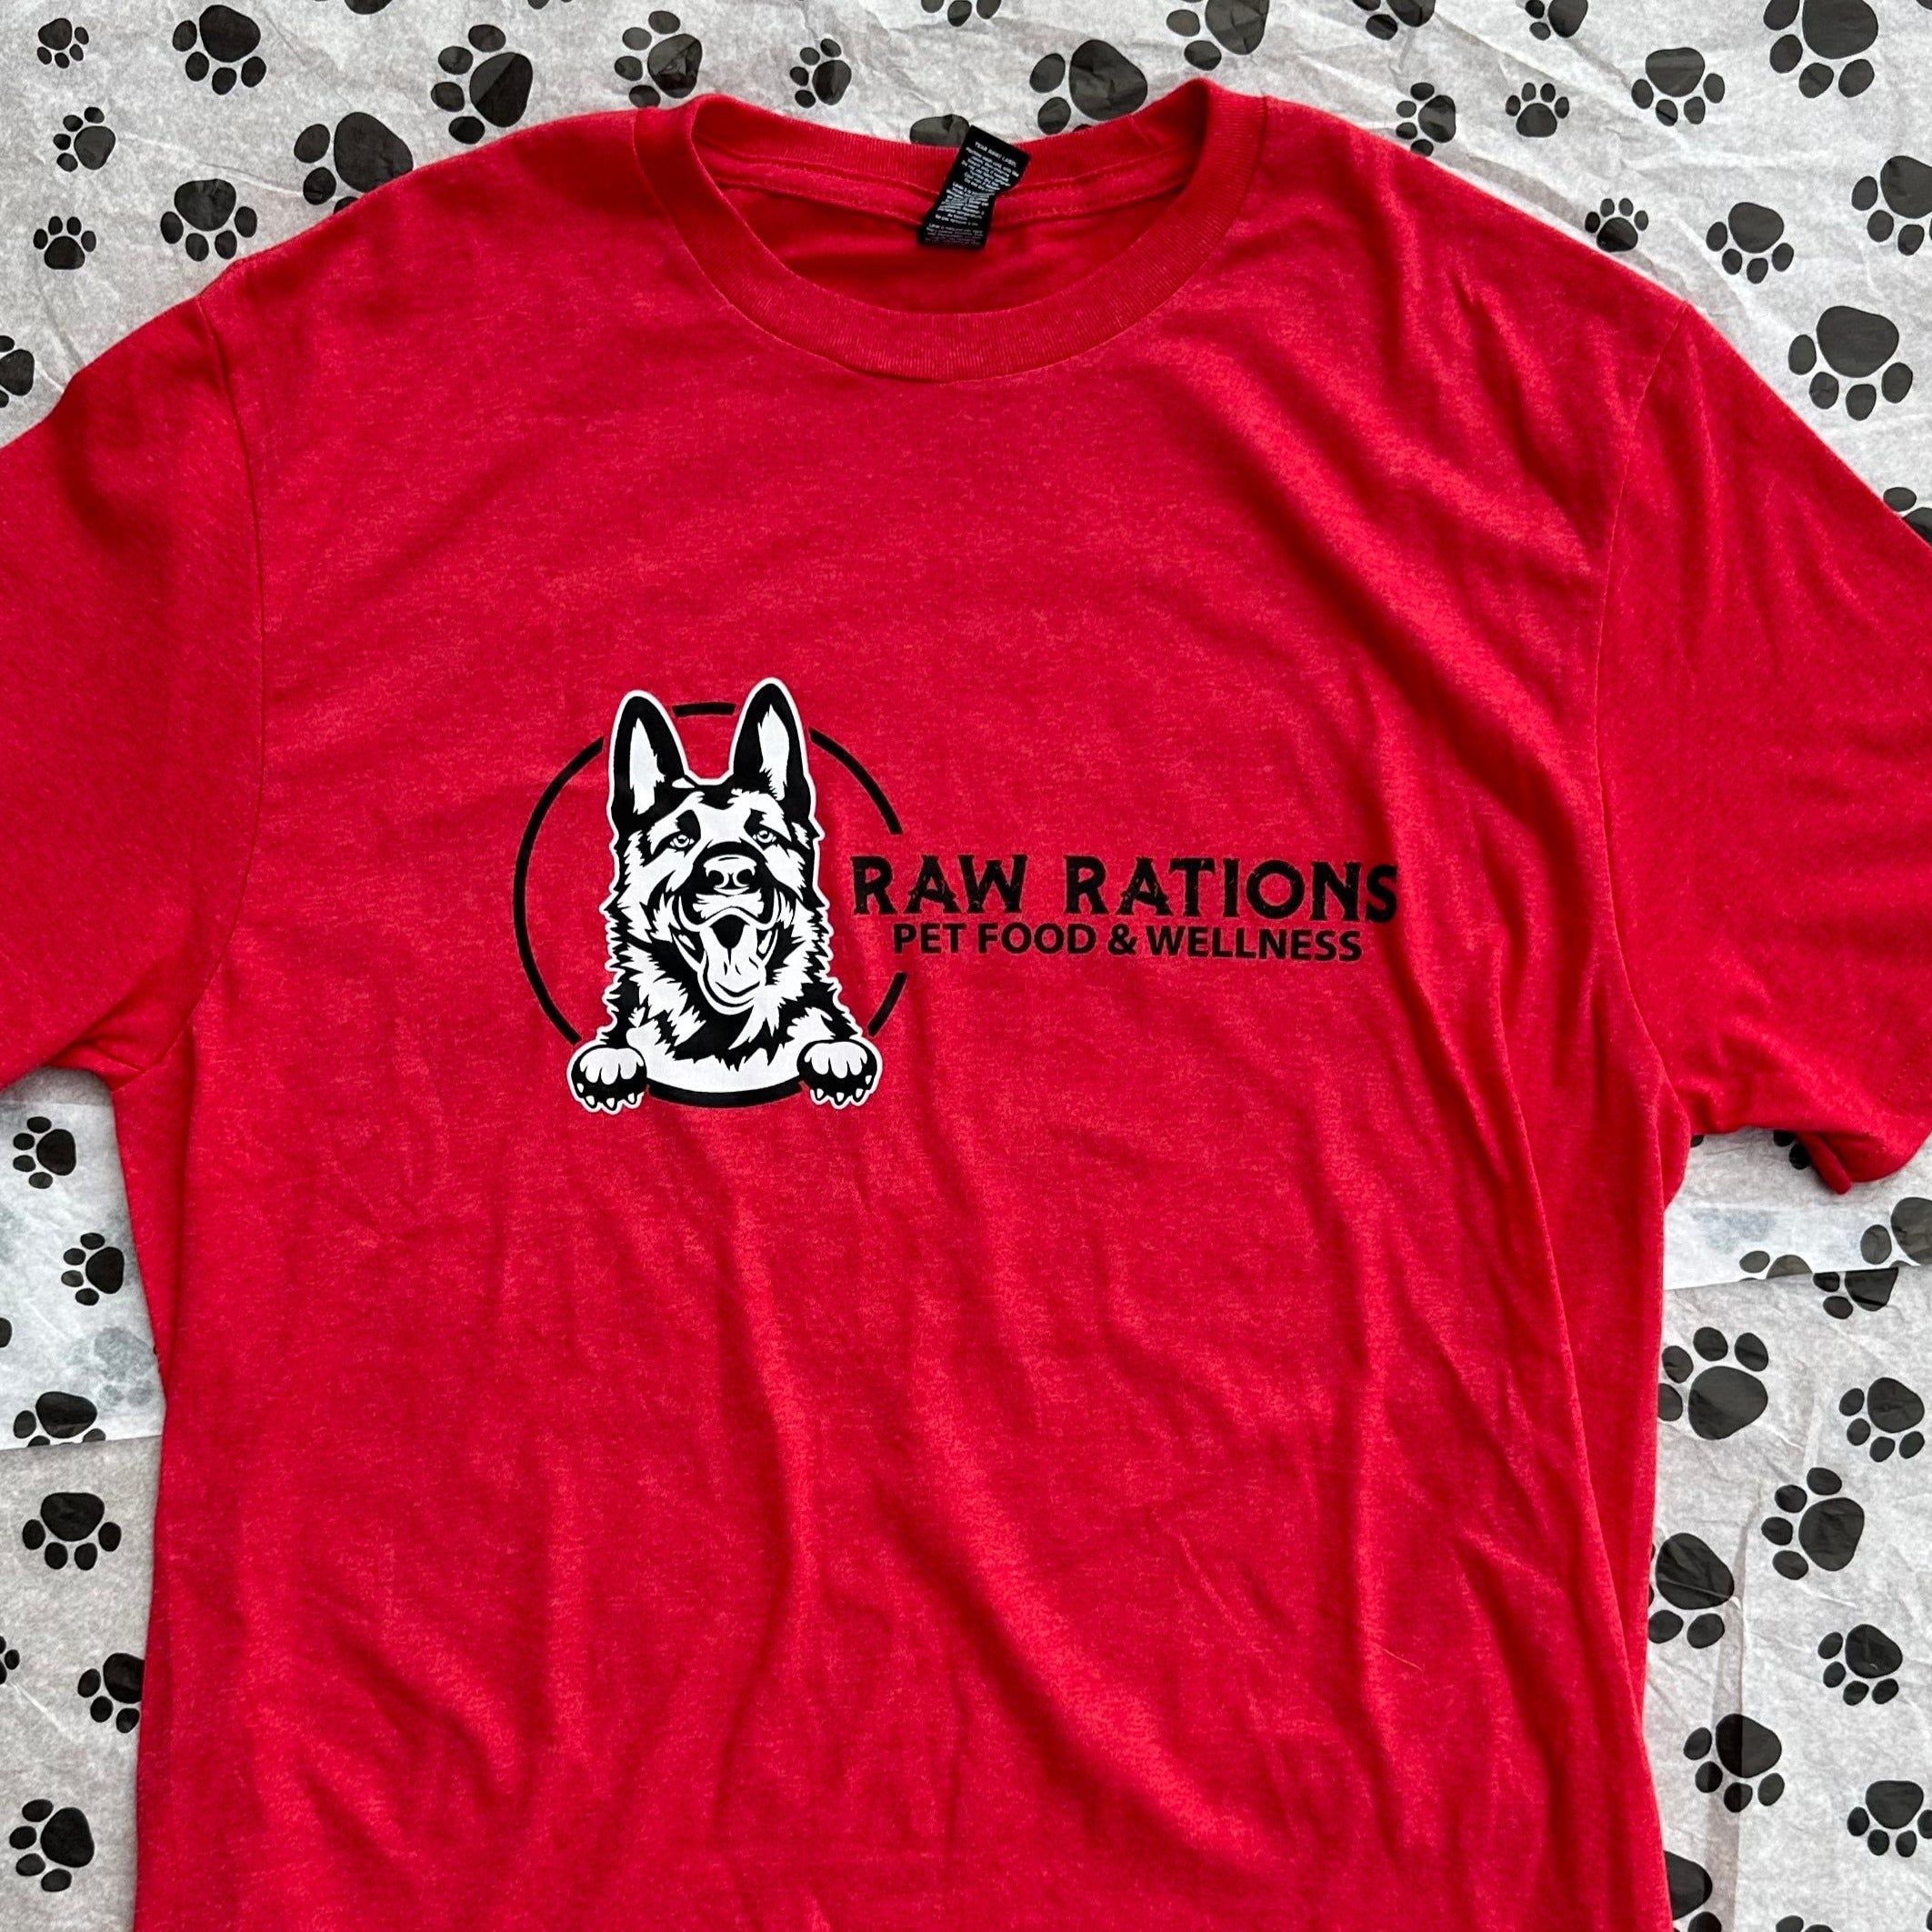 raw rations tshirt, raw rations pet food and wellness